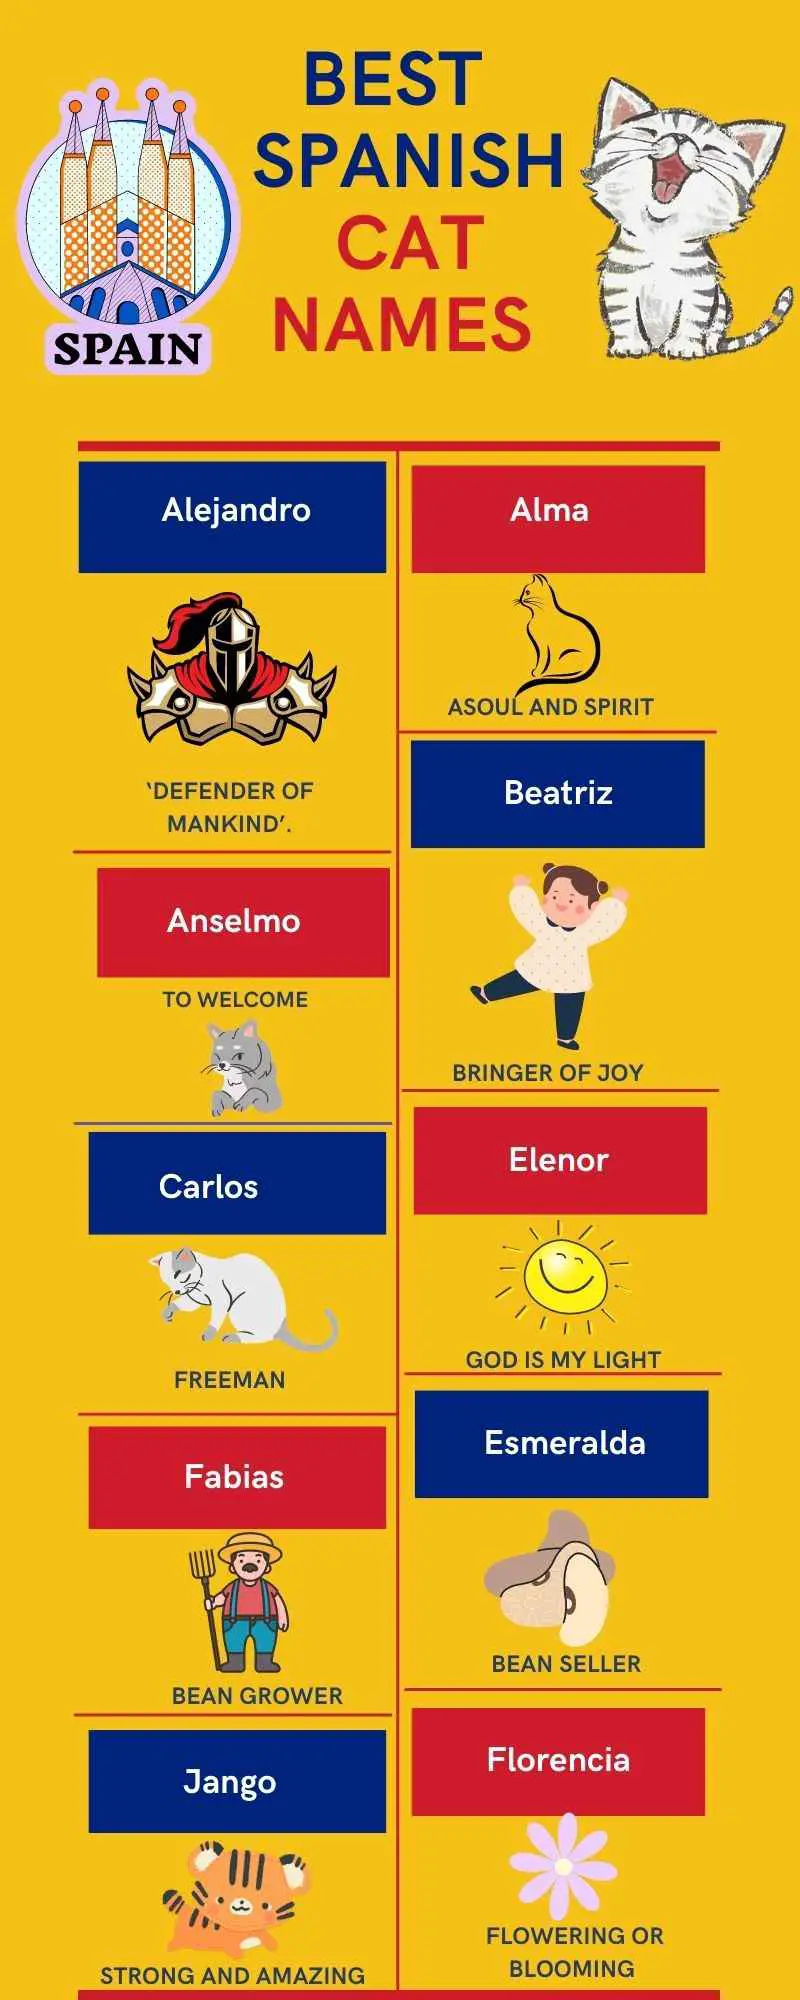 This infographic shows the lsit of Spanish cat names for boys  and girls  